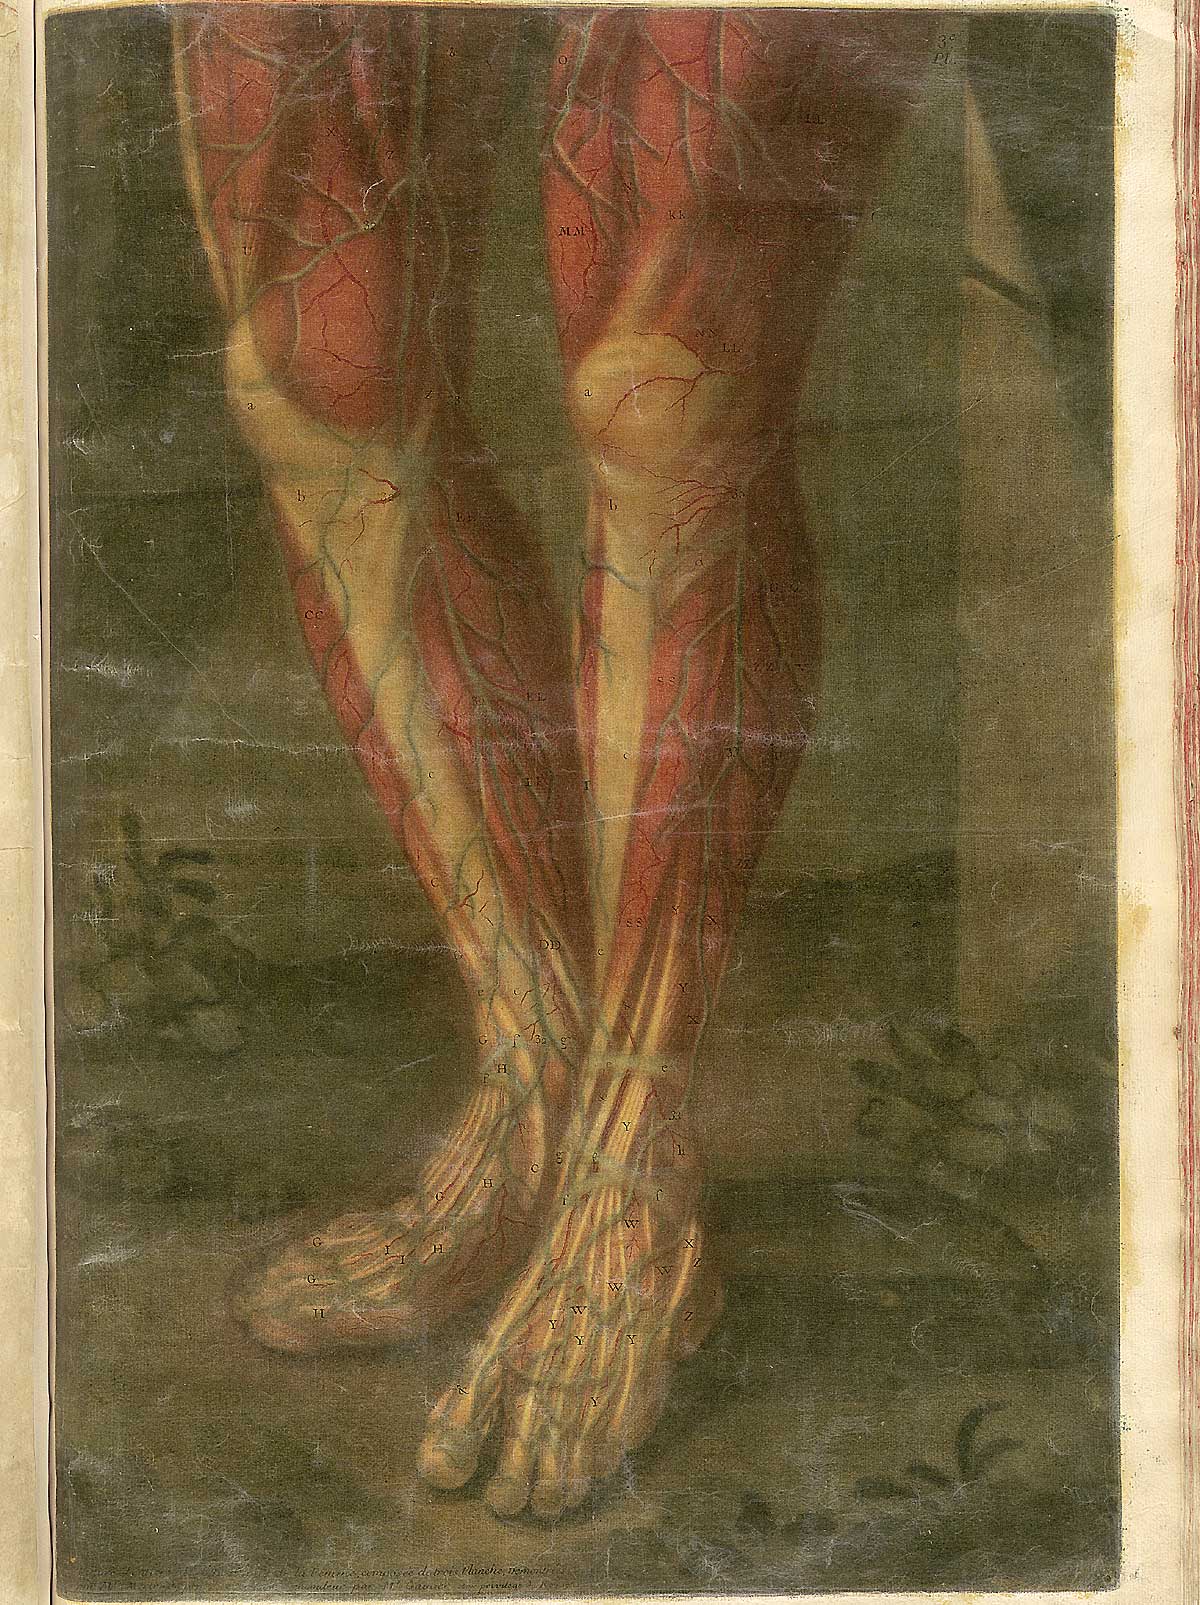 Color mezzotint of a woman’s legs with skin removed to reveal the circulatory system and muscles; from Jacques Fabian Gautier d’Agoty’s Anatomie générale des viscères en situation, NLM Call no.: WZ 260 G283c 1745.